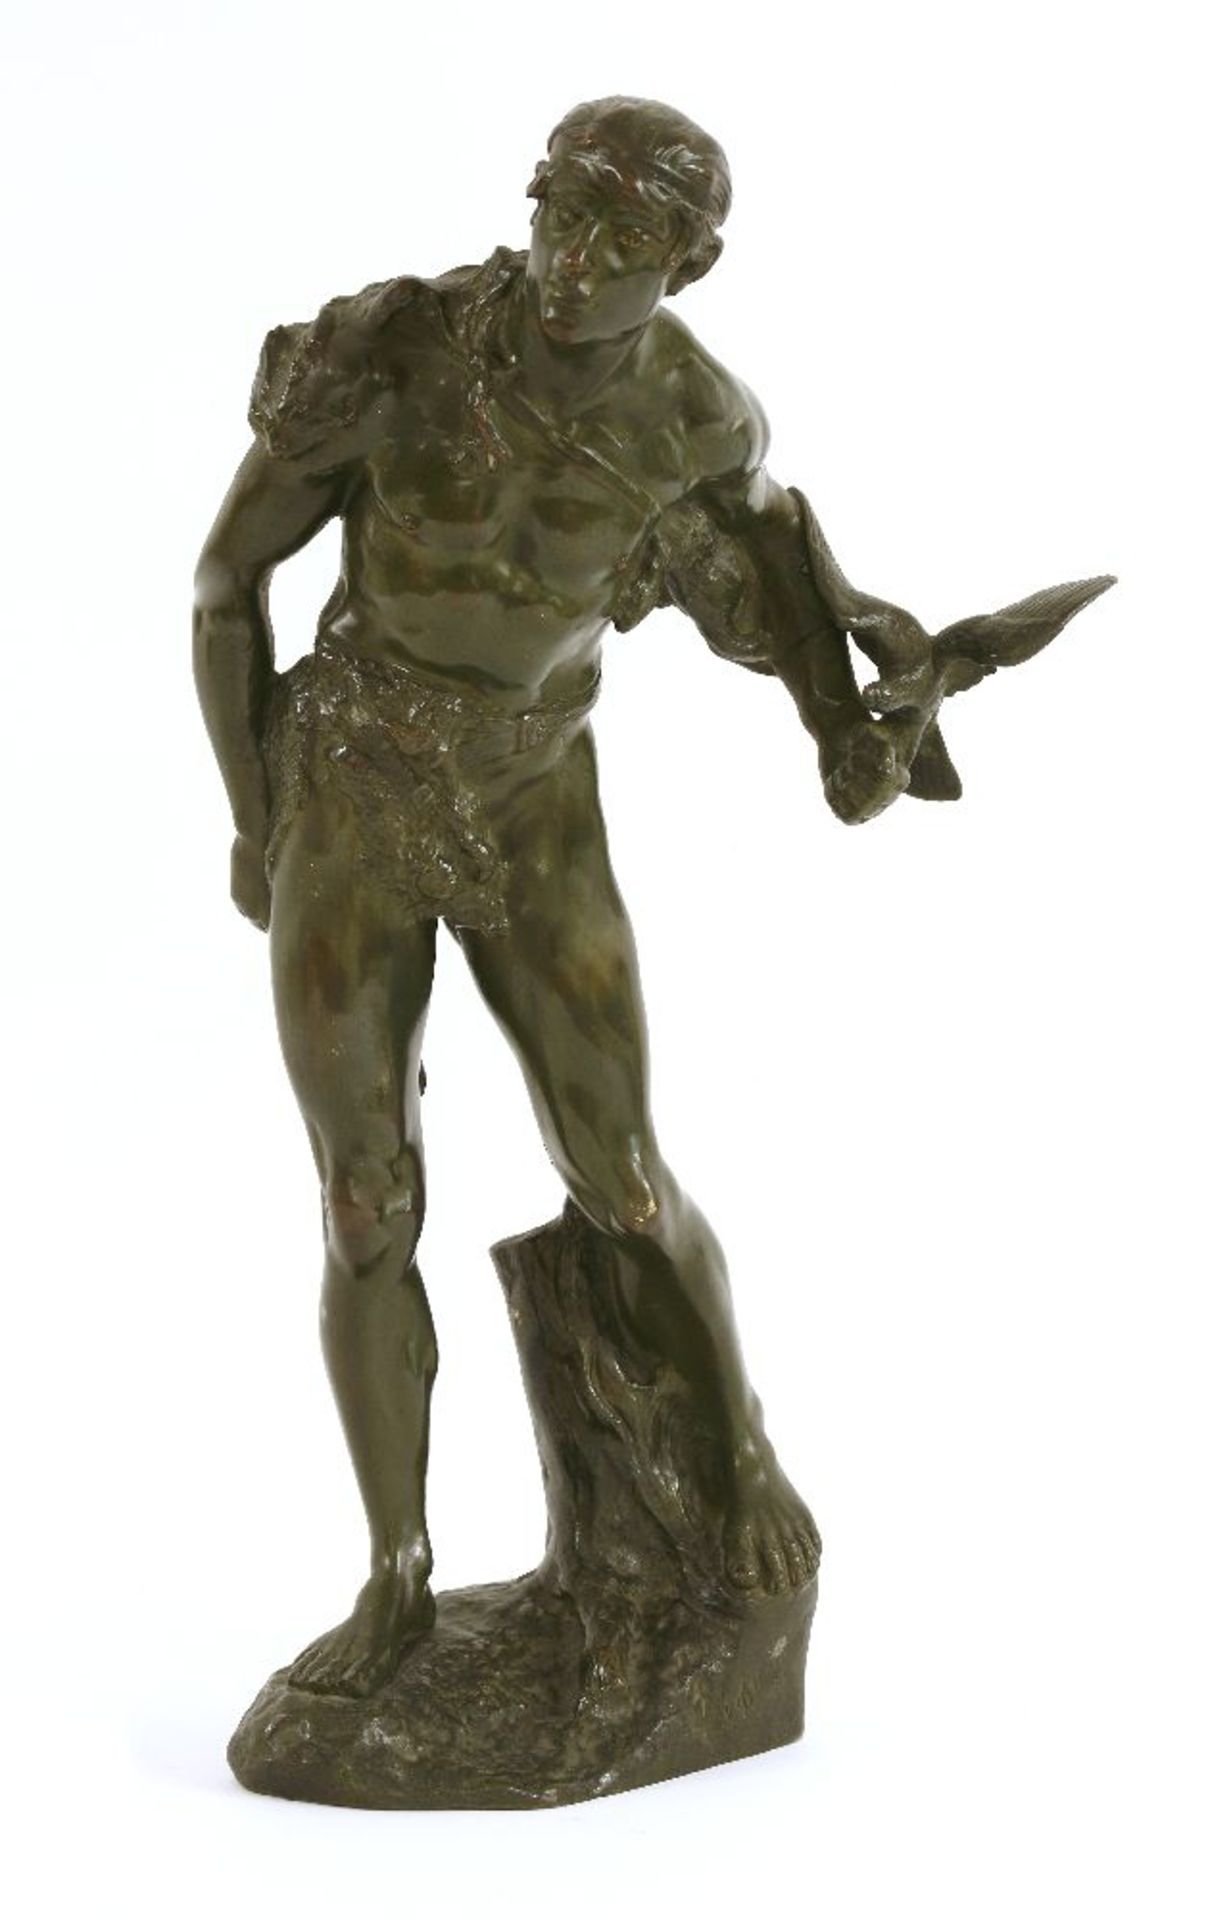 A French bronze figure,19th century, of a man wearing skins, holding a bird, indistinctly signed '